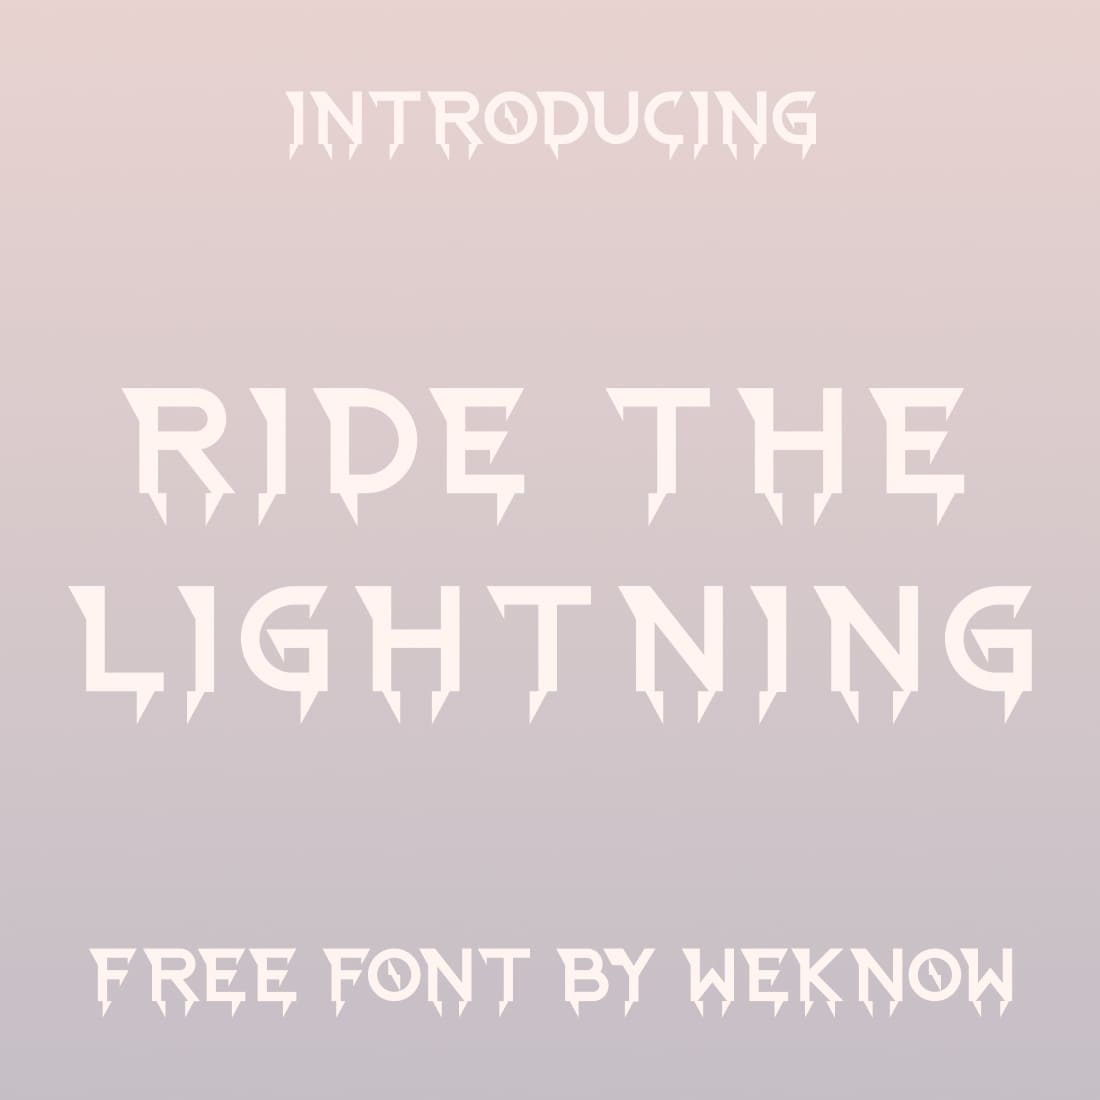 This font is similar to Gothic, but in light colors.